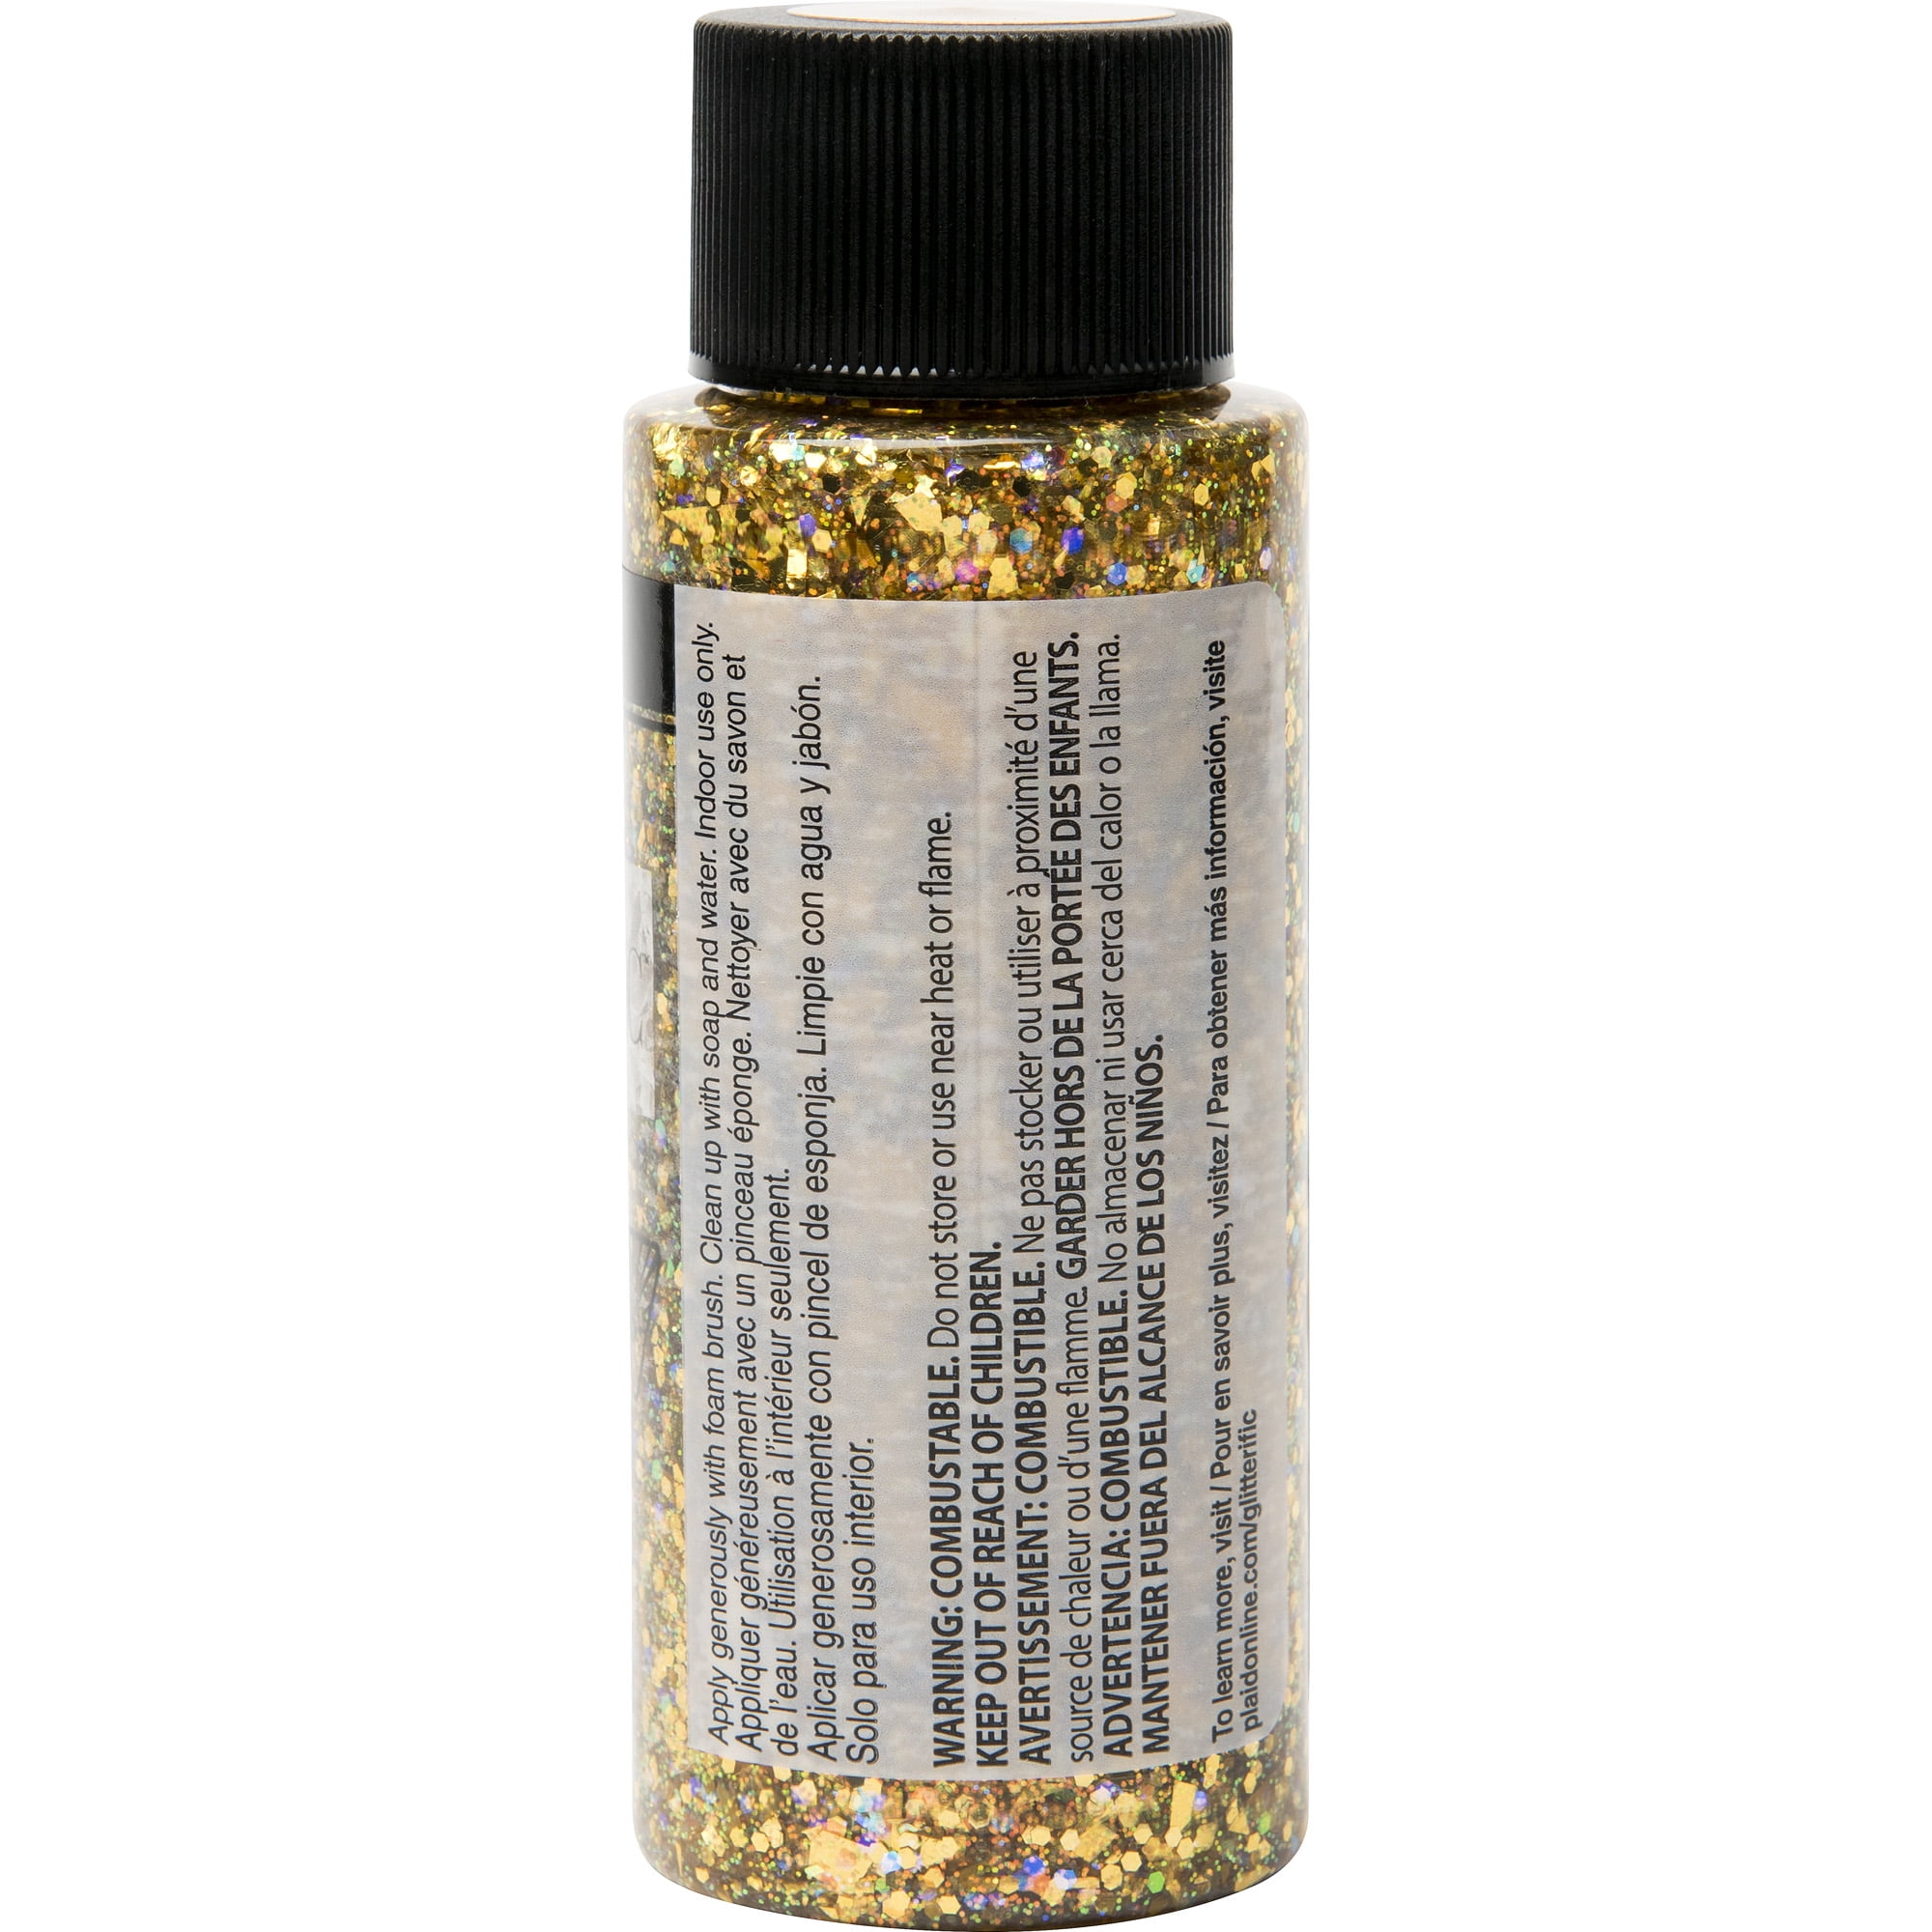  FolkArt Glitterific Fine Assorted Acrylic Craft Paints, Fine  Gold 2 fl oz Premium Acrylic Paint With Glitter Finish, Perfect For Easy To  Apply DIY Arts And Crafts, 11863 : Arts, Crafts